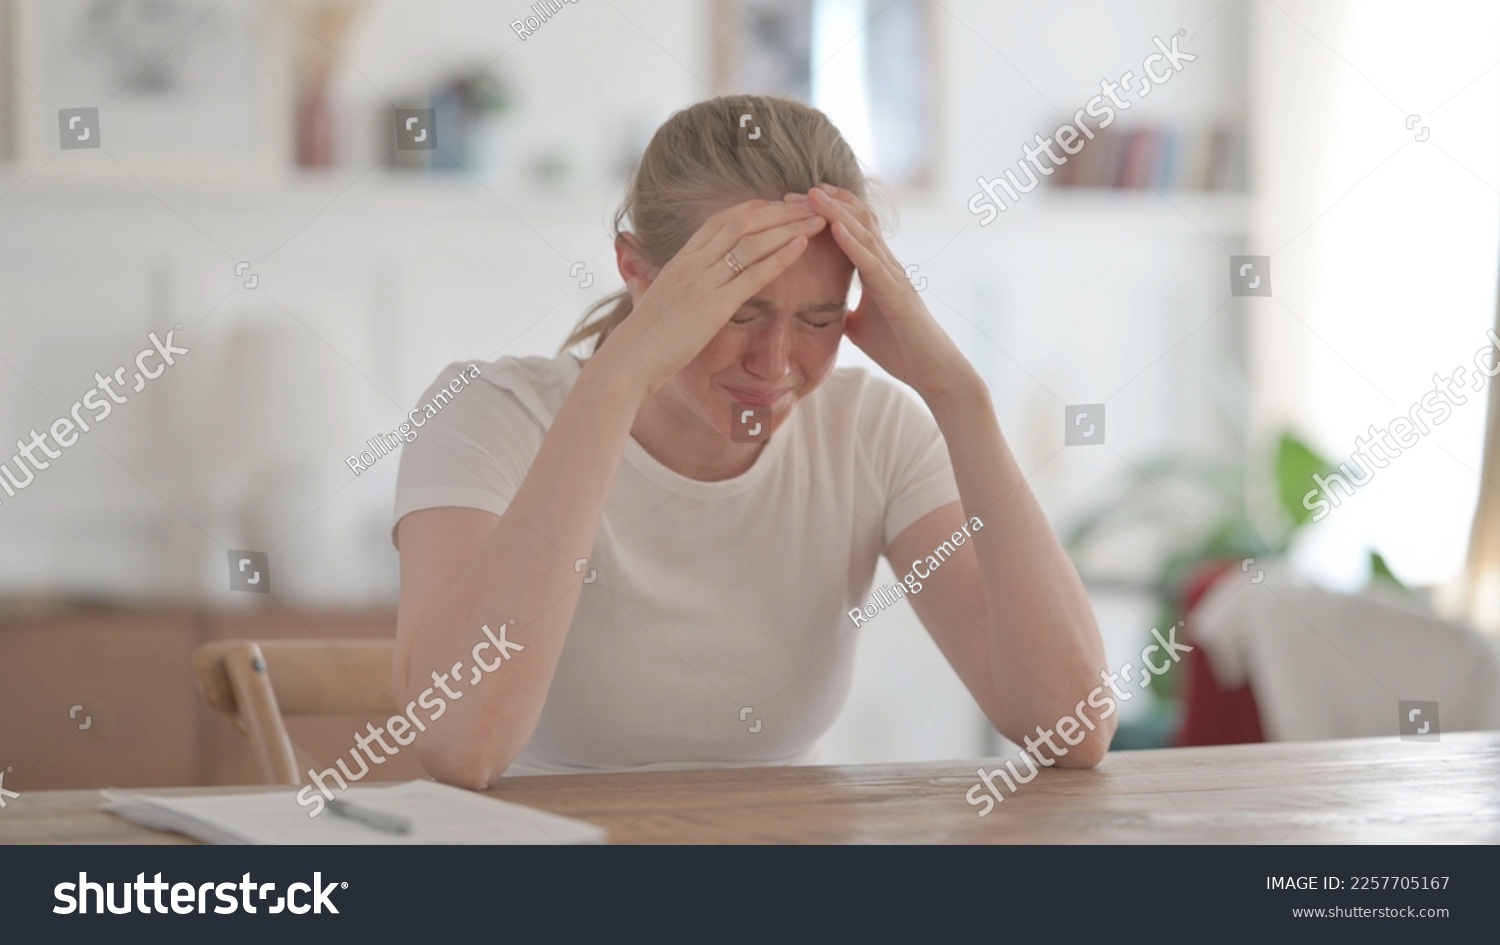 Upset Young Woman Feeling Worried While Sitting in Office #2257705167